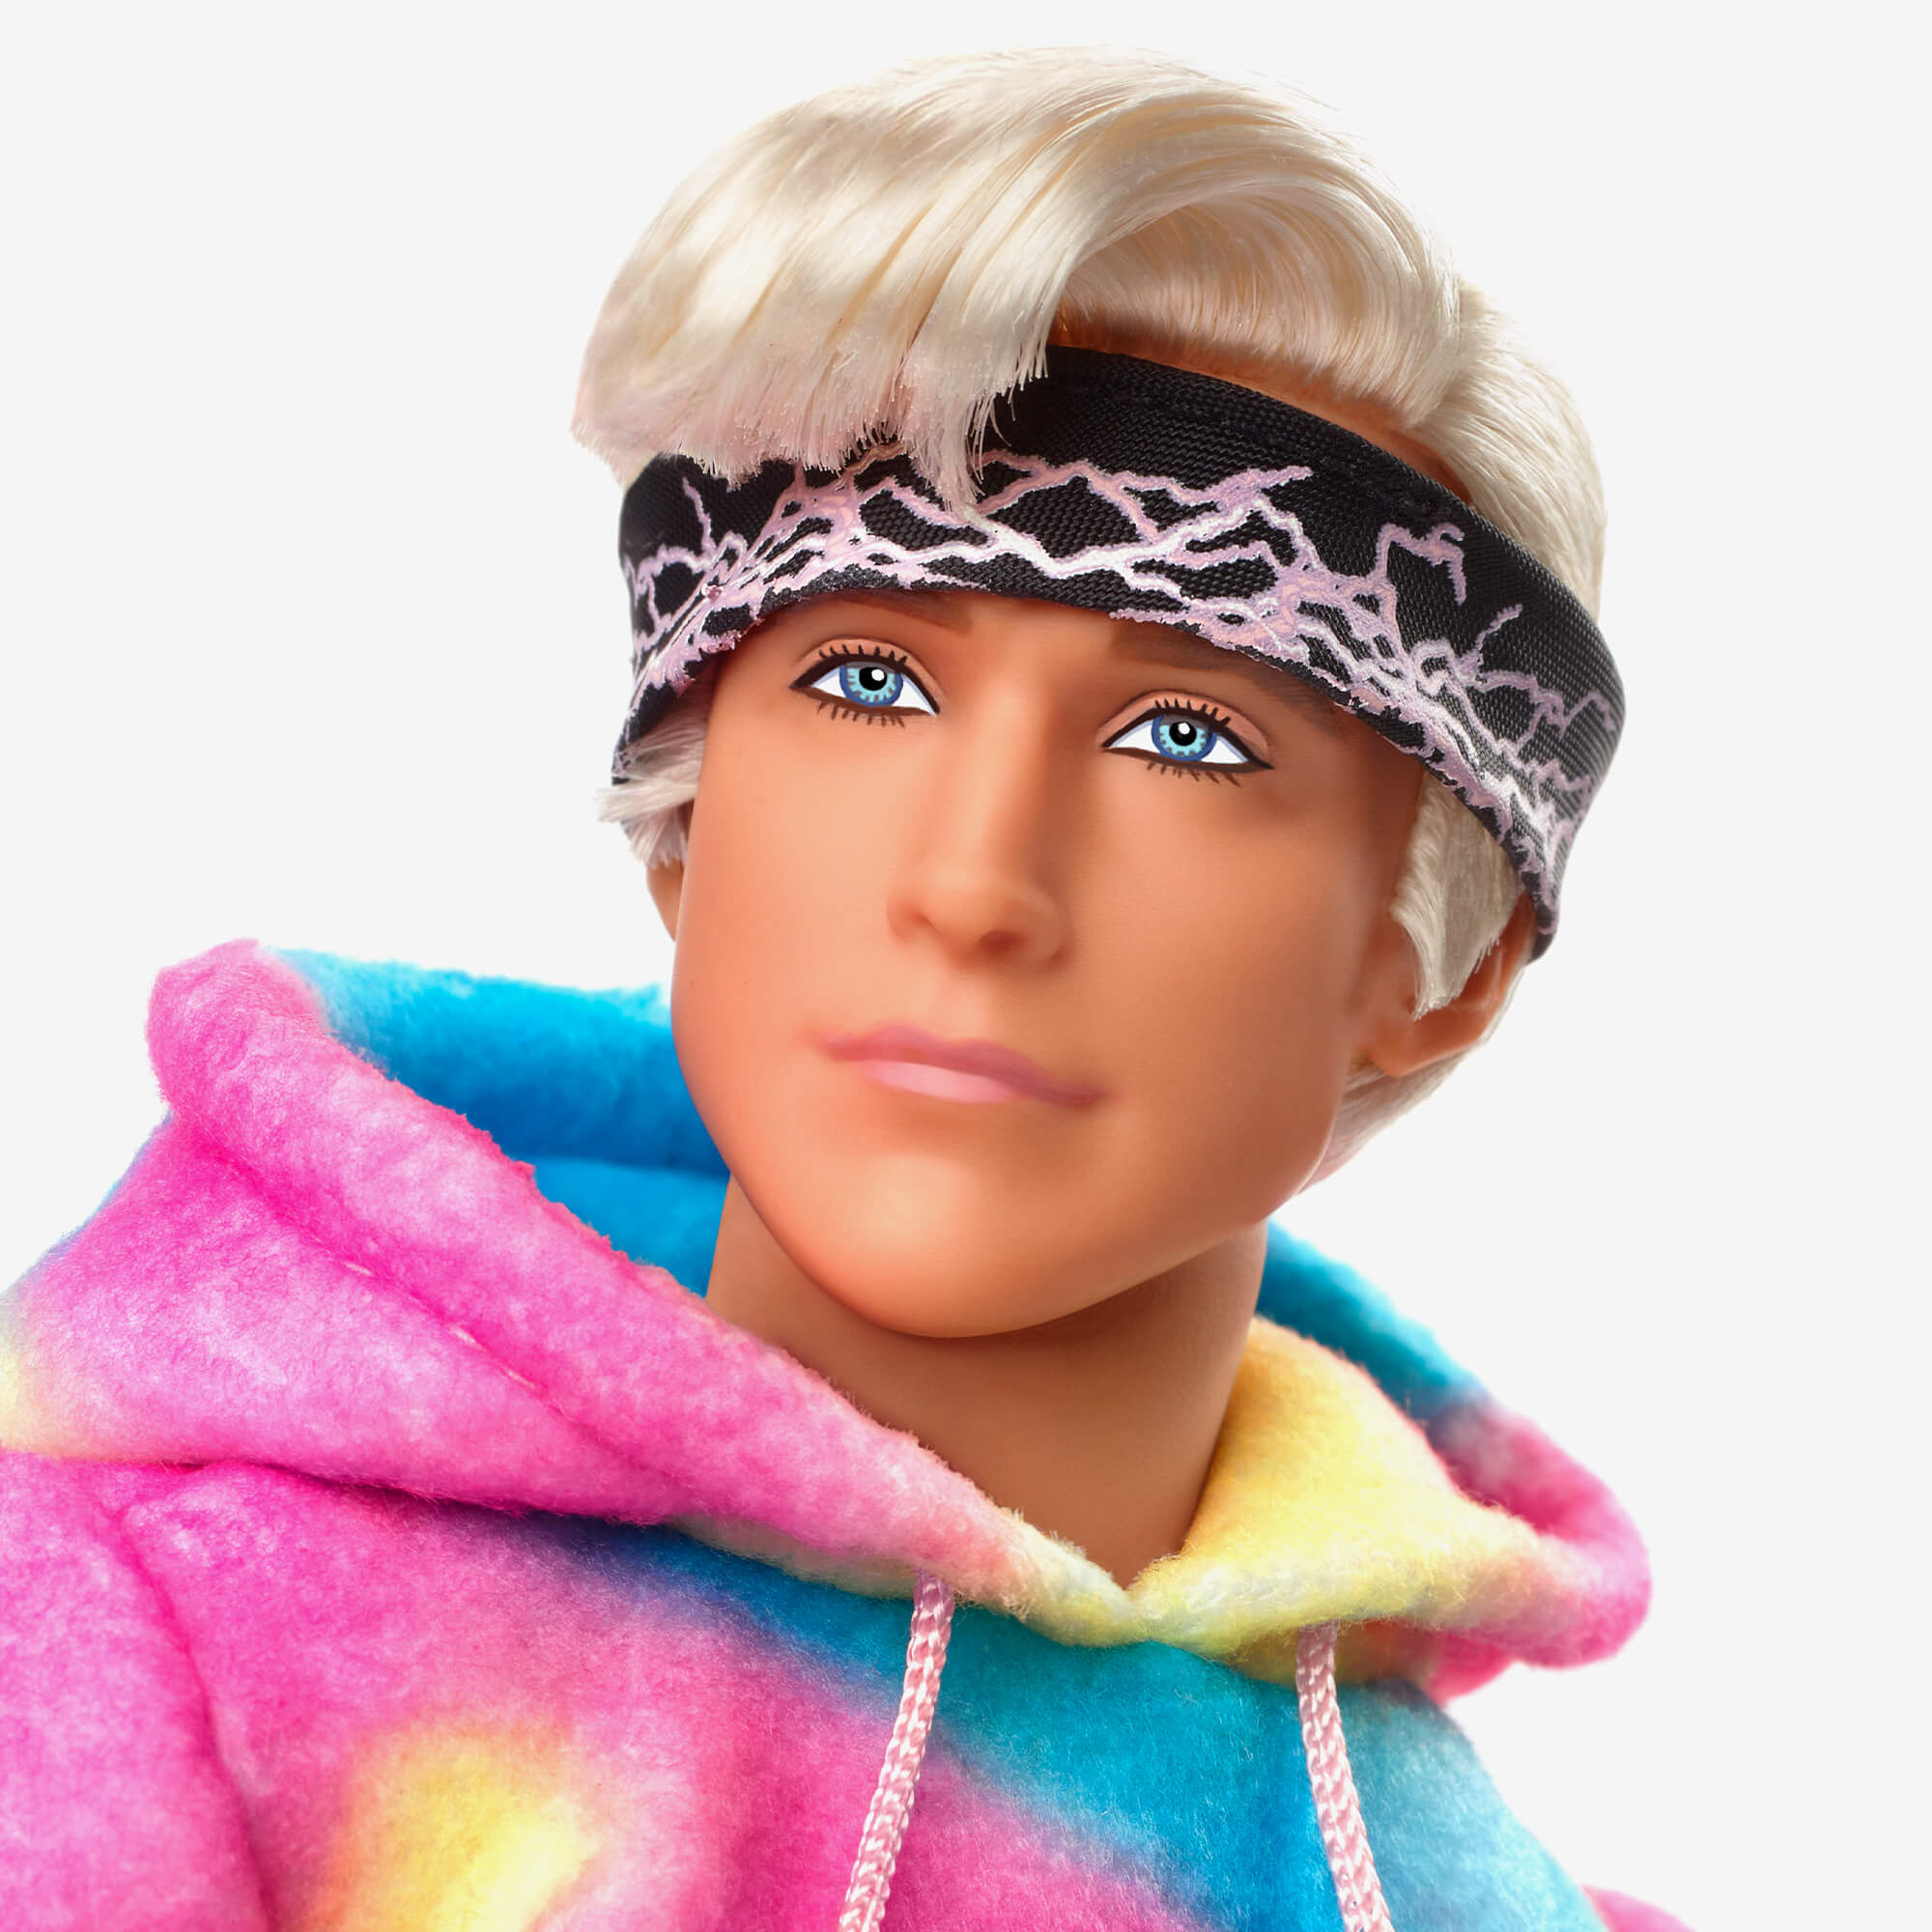 Who is Ken, really? The history of the world's most misunderstood doll